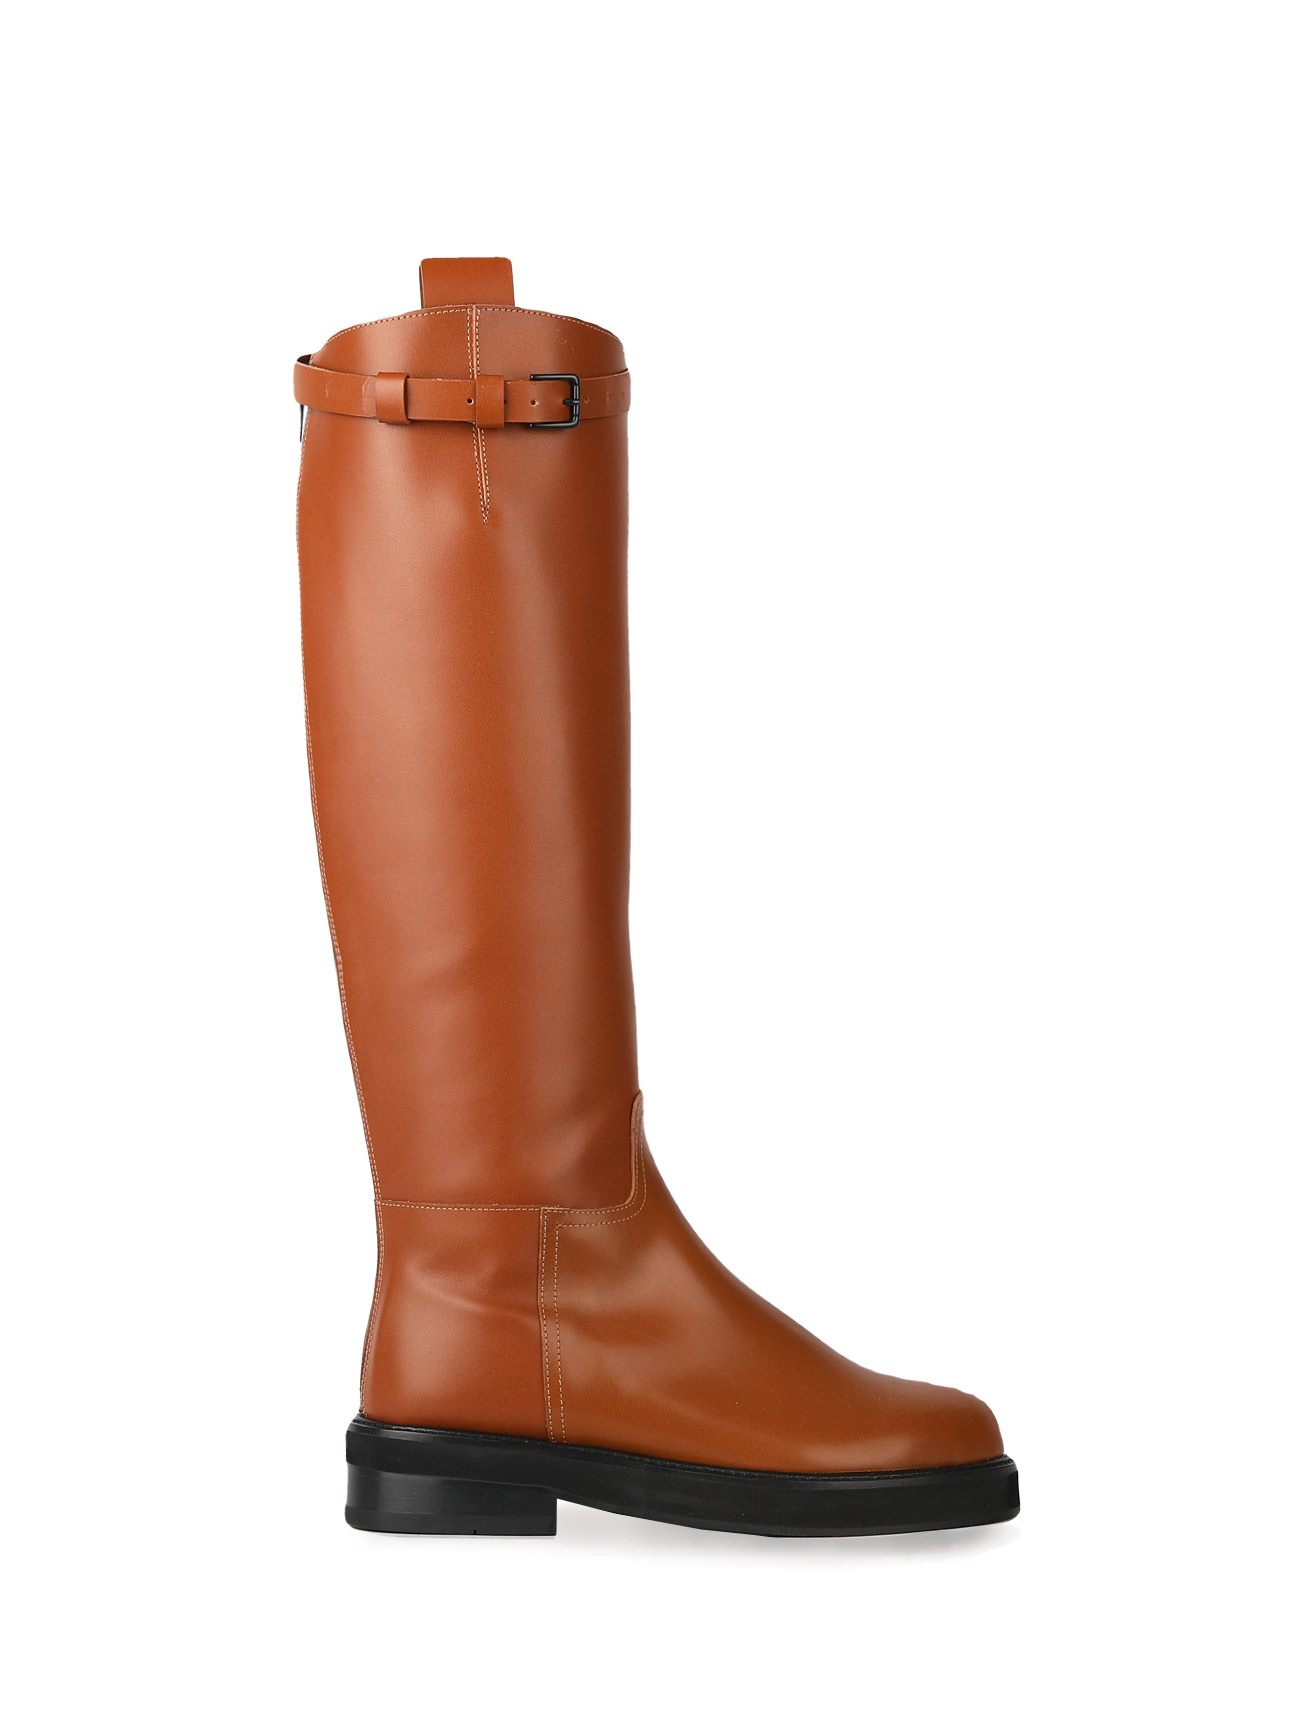 JOY BUCKLE STRAP LEATHER BOOTS - CAMEL